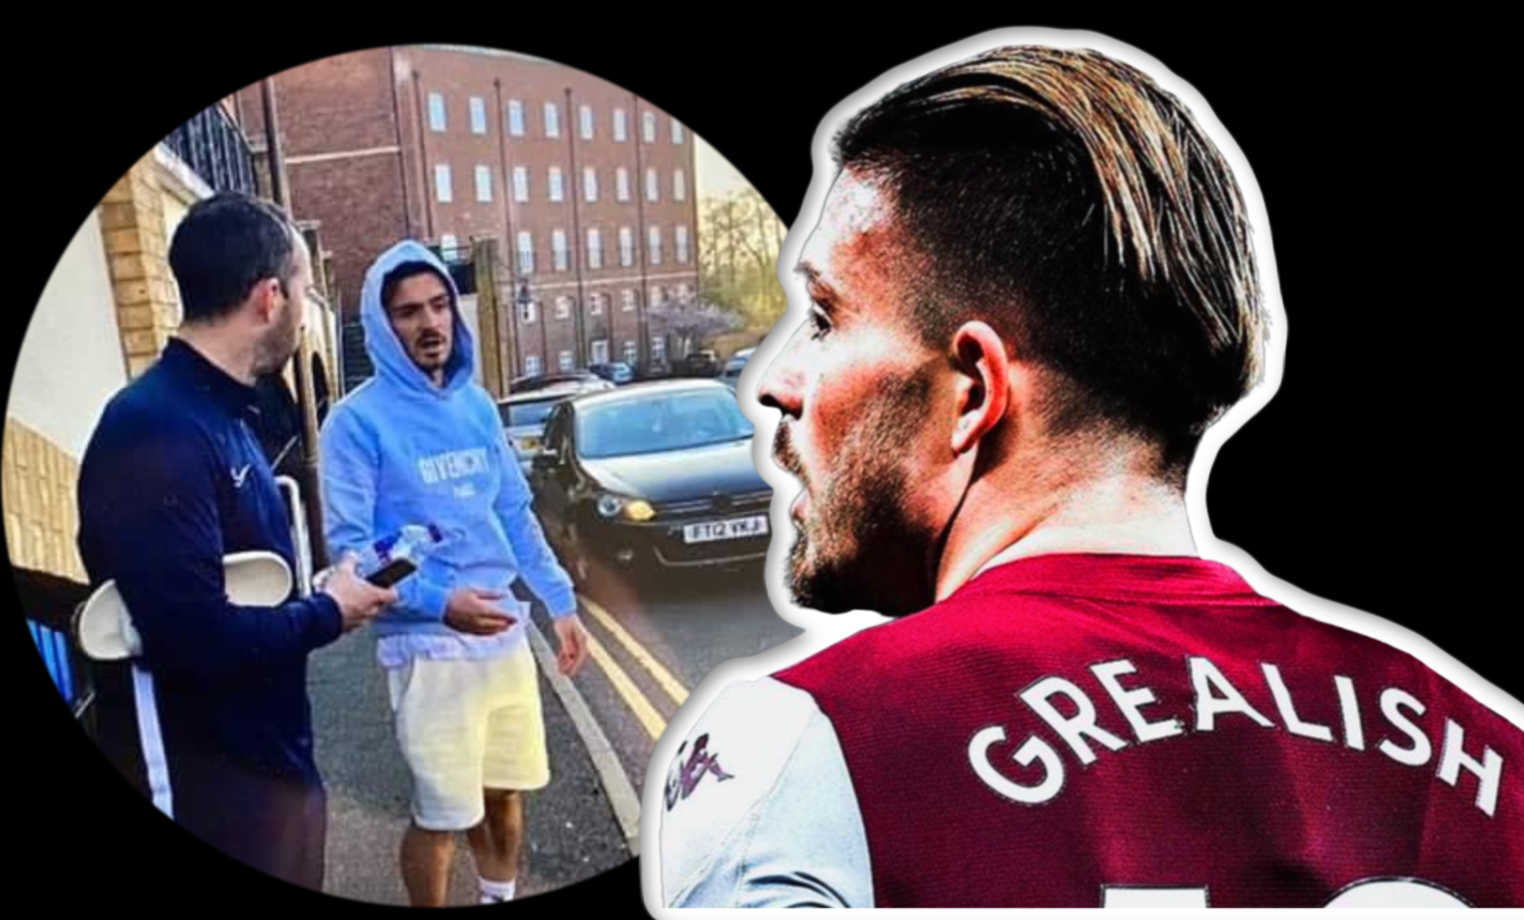 Photo – Jack Grealish rumored to have gone on a drunk driving rampage at Waterside in Dickens Heath